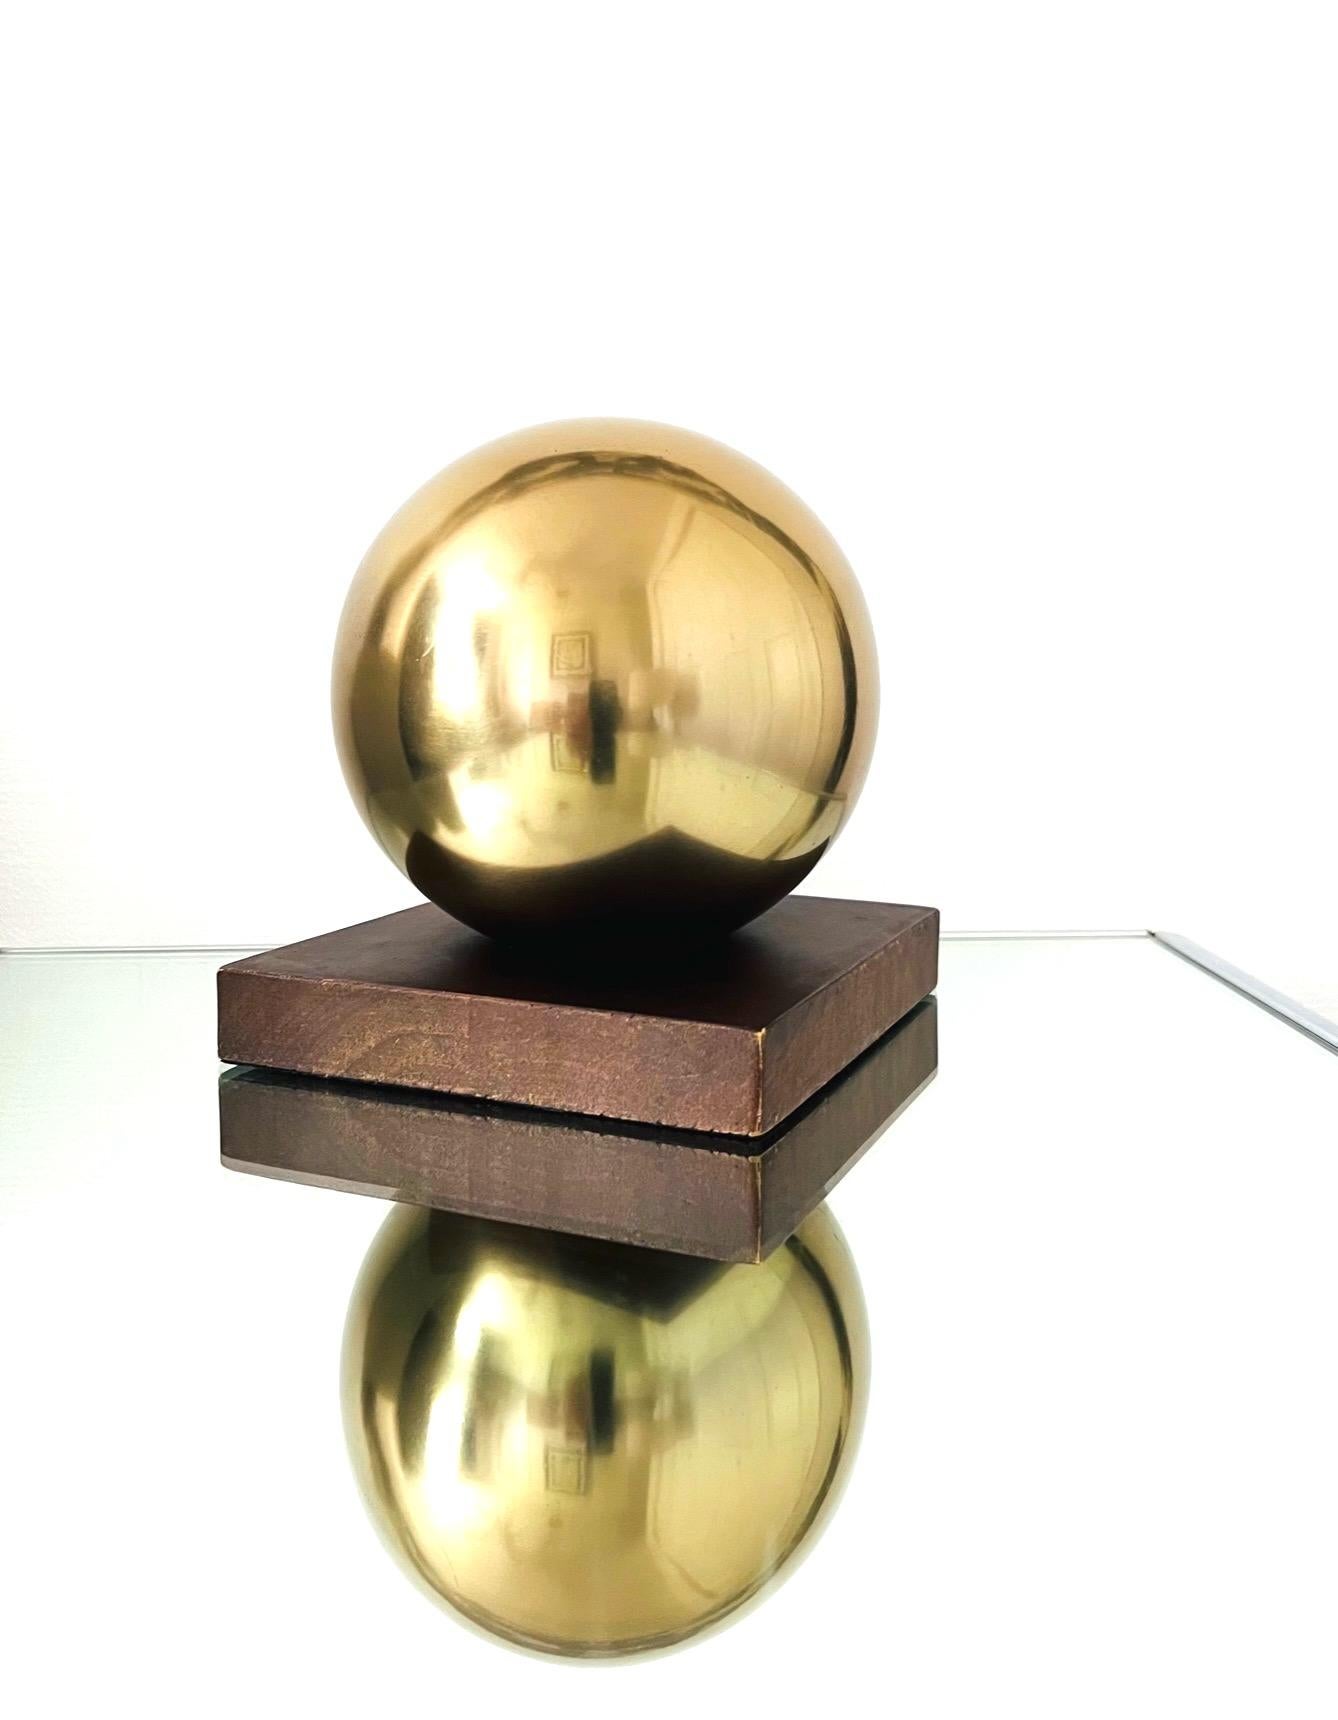 Mid-Century Modern polished brass ball orb sculptural bookend. The design features a round spherical globe beautifully enhanced by a square walnut wood Stand, adding an architectural element to any room. The base is stained in a walnut brown finish.